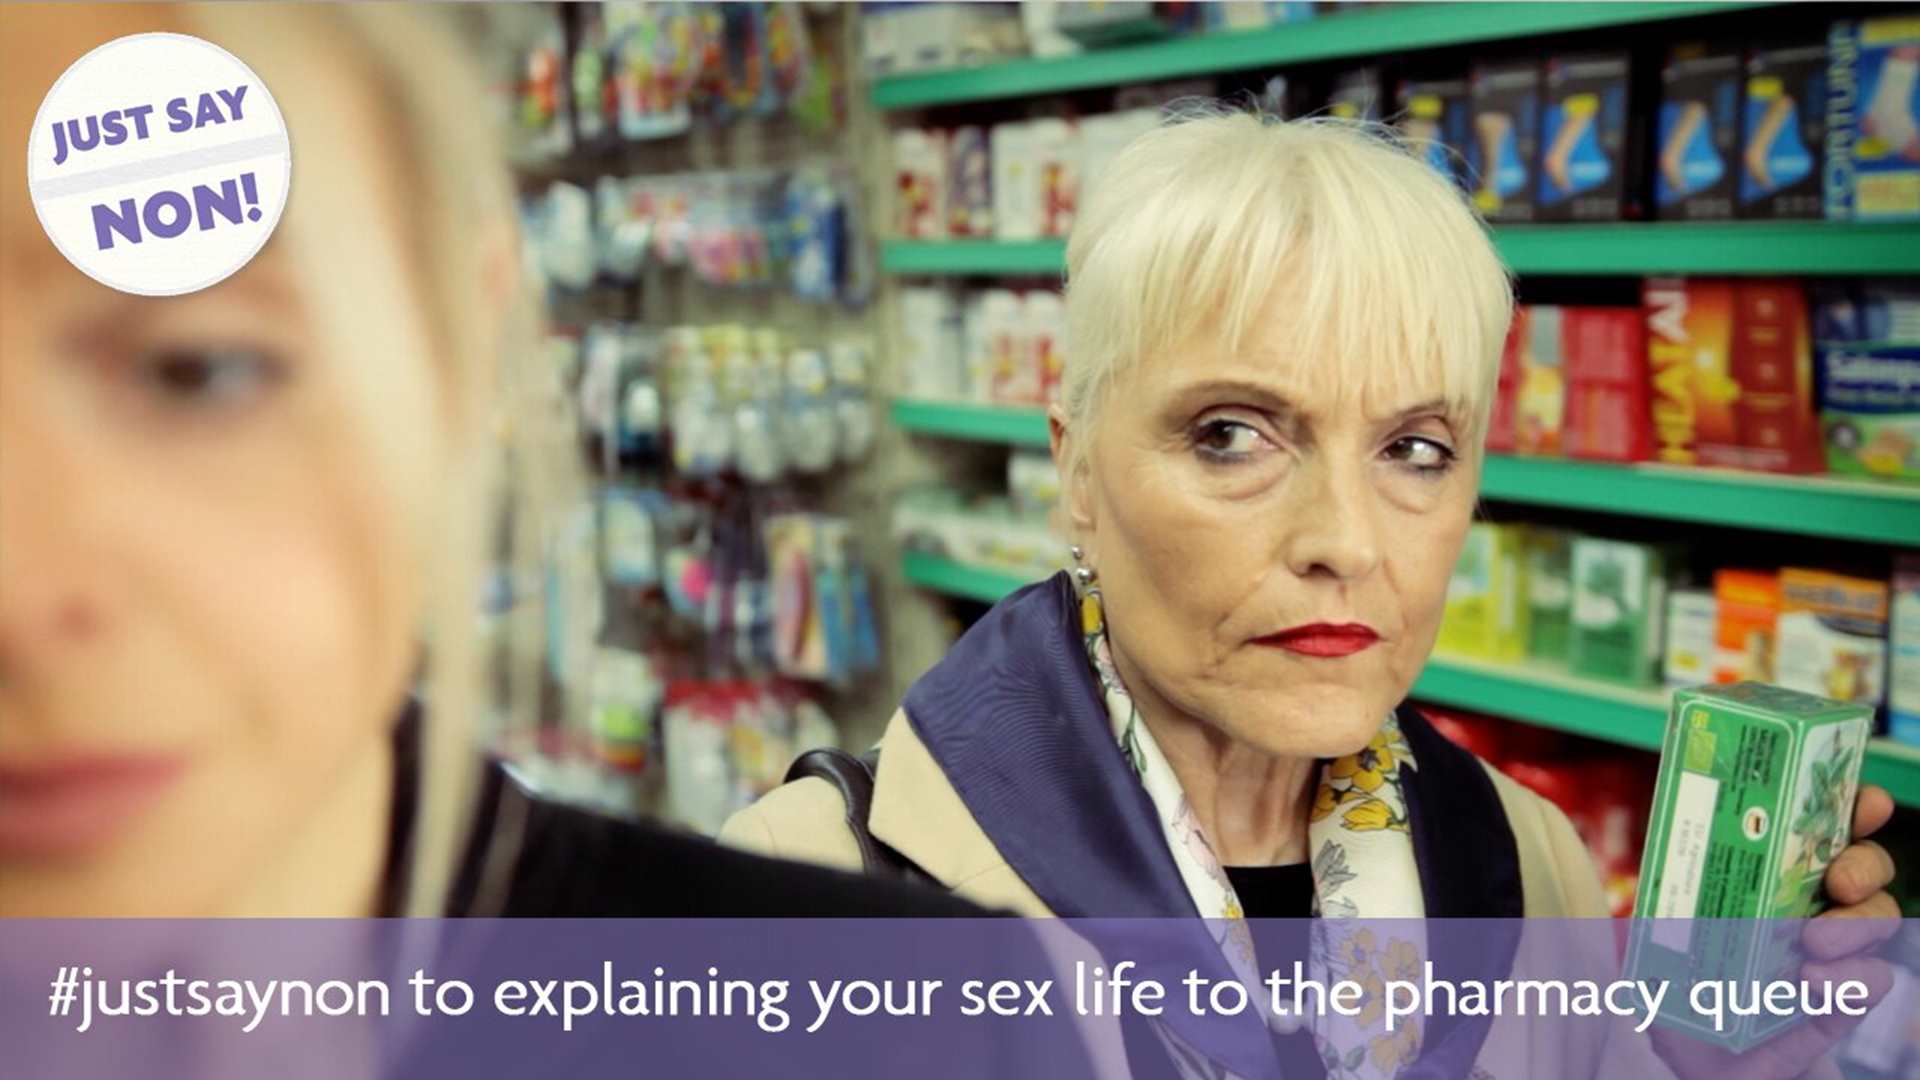 Woman giving judgemental look at a woman at a pharmacy